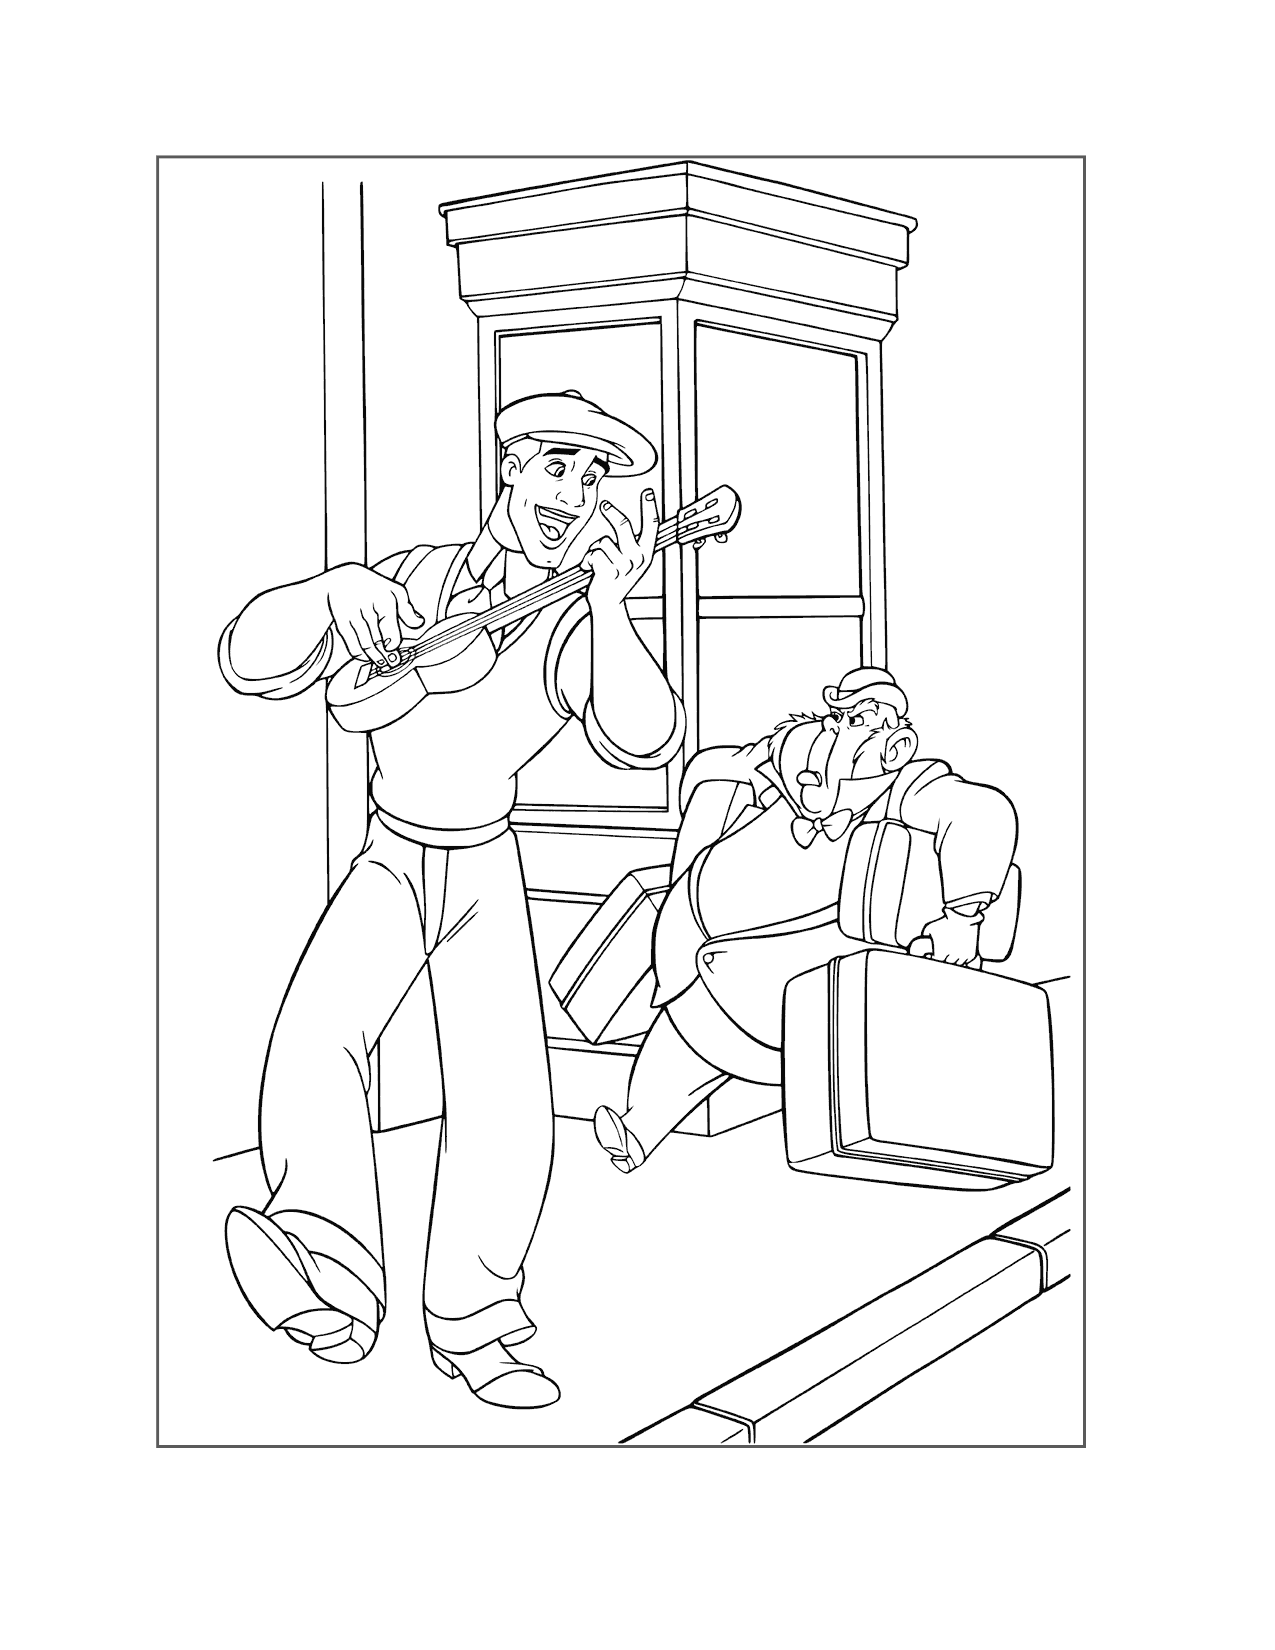 Prince Naveen Plays The Ukulele Coloring Page